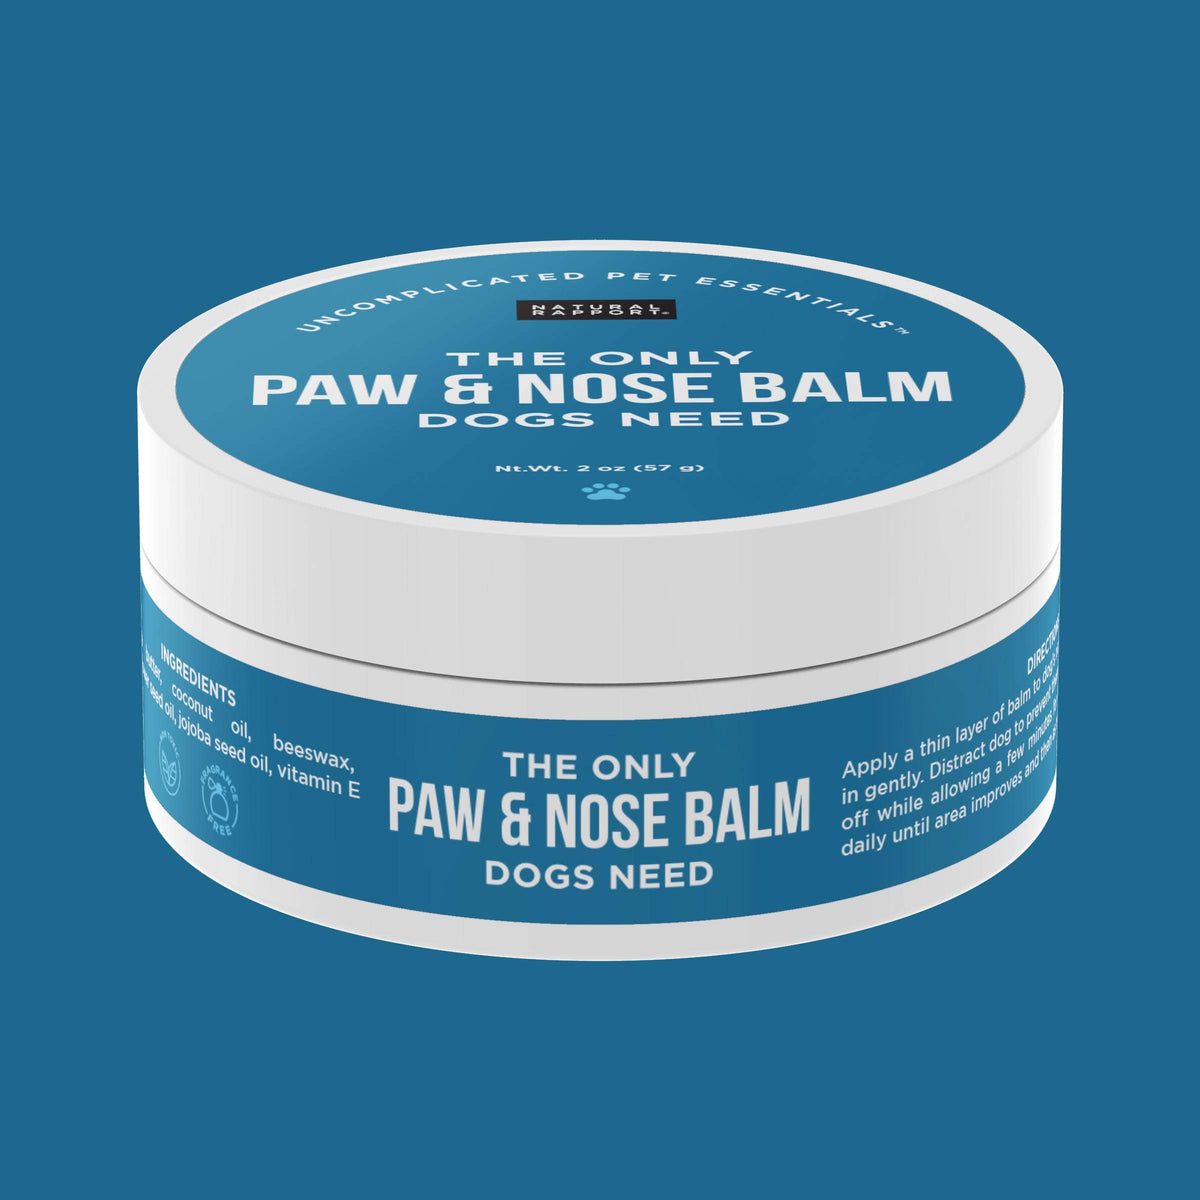 The Only Paw & Nose Balm Dogs Need